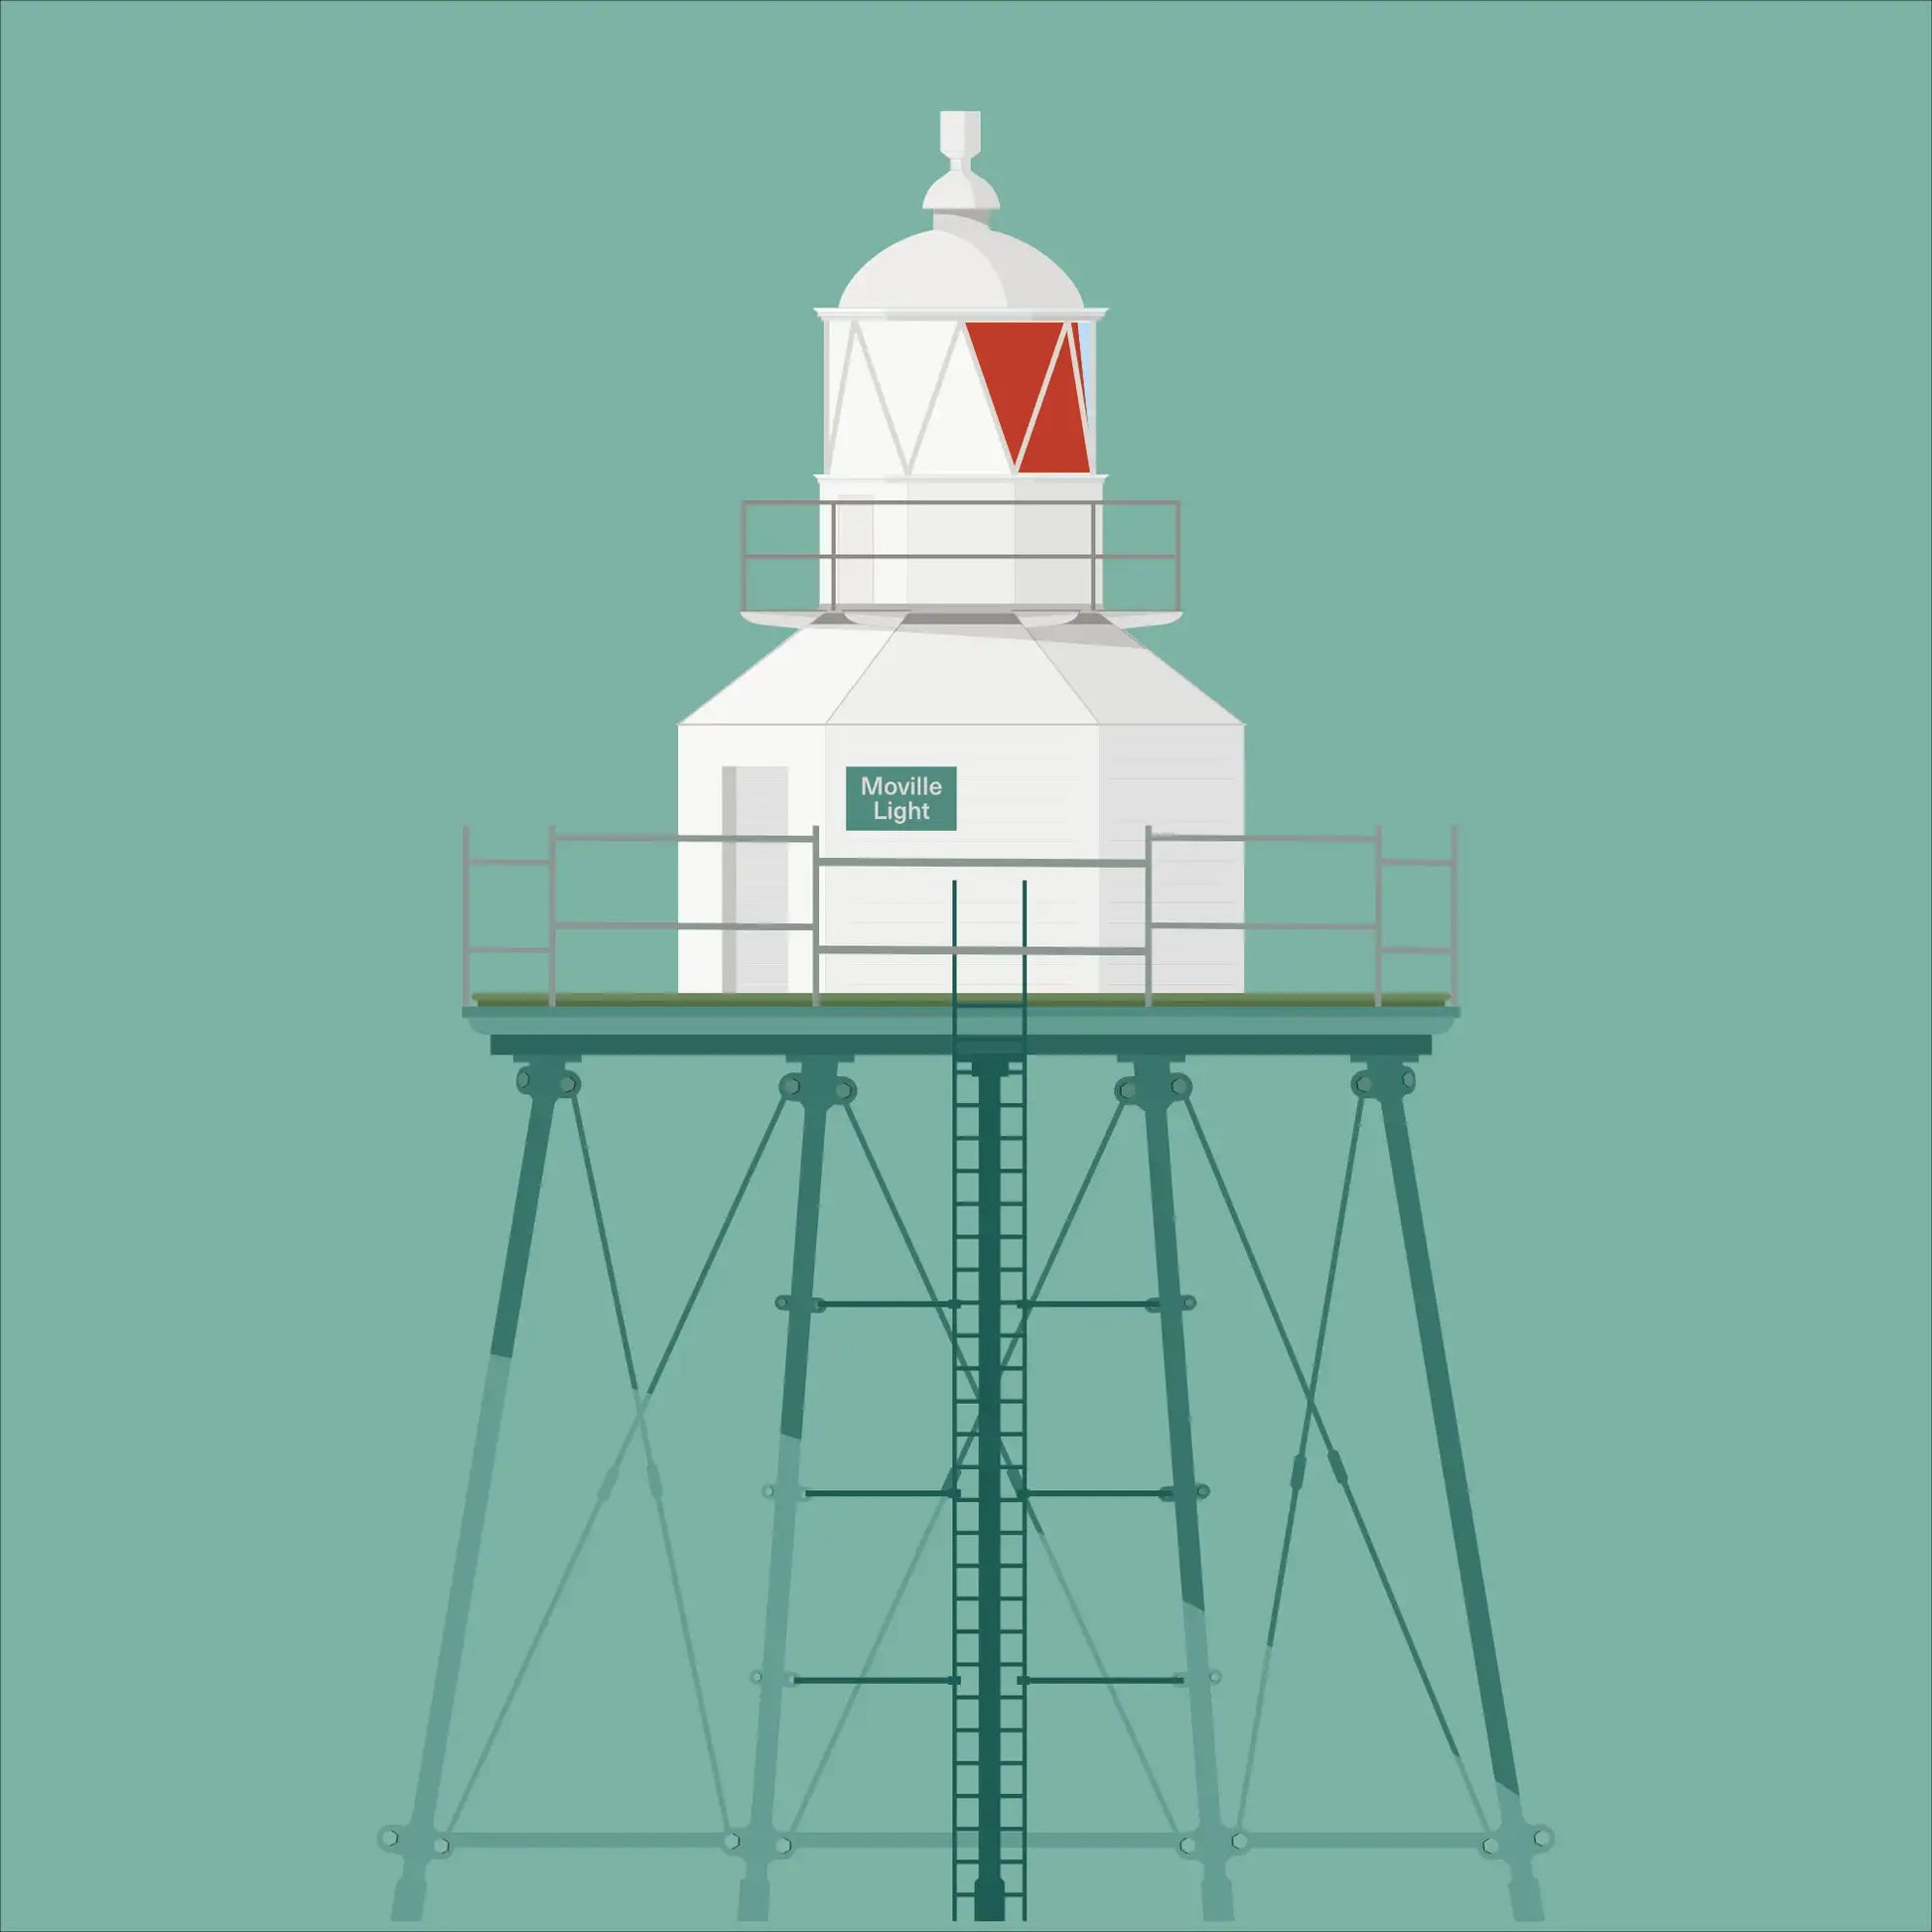 Contemporary graphic illustration of Moville lighthouse on a white background inside light blue square.